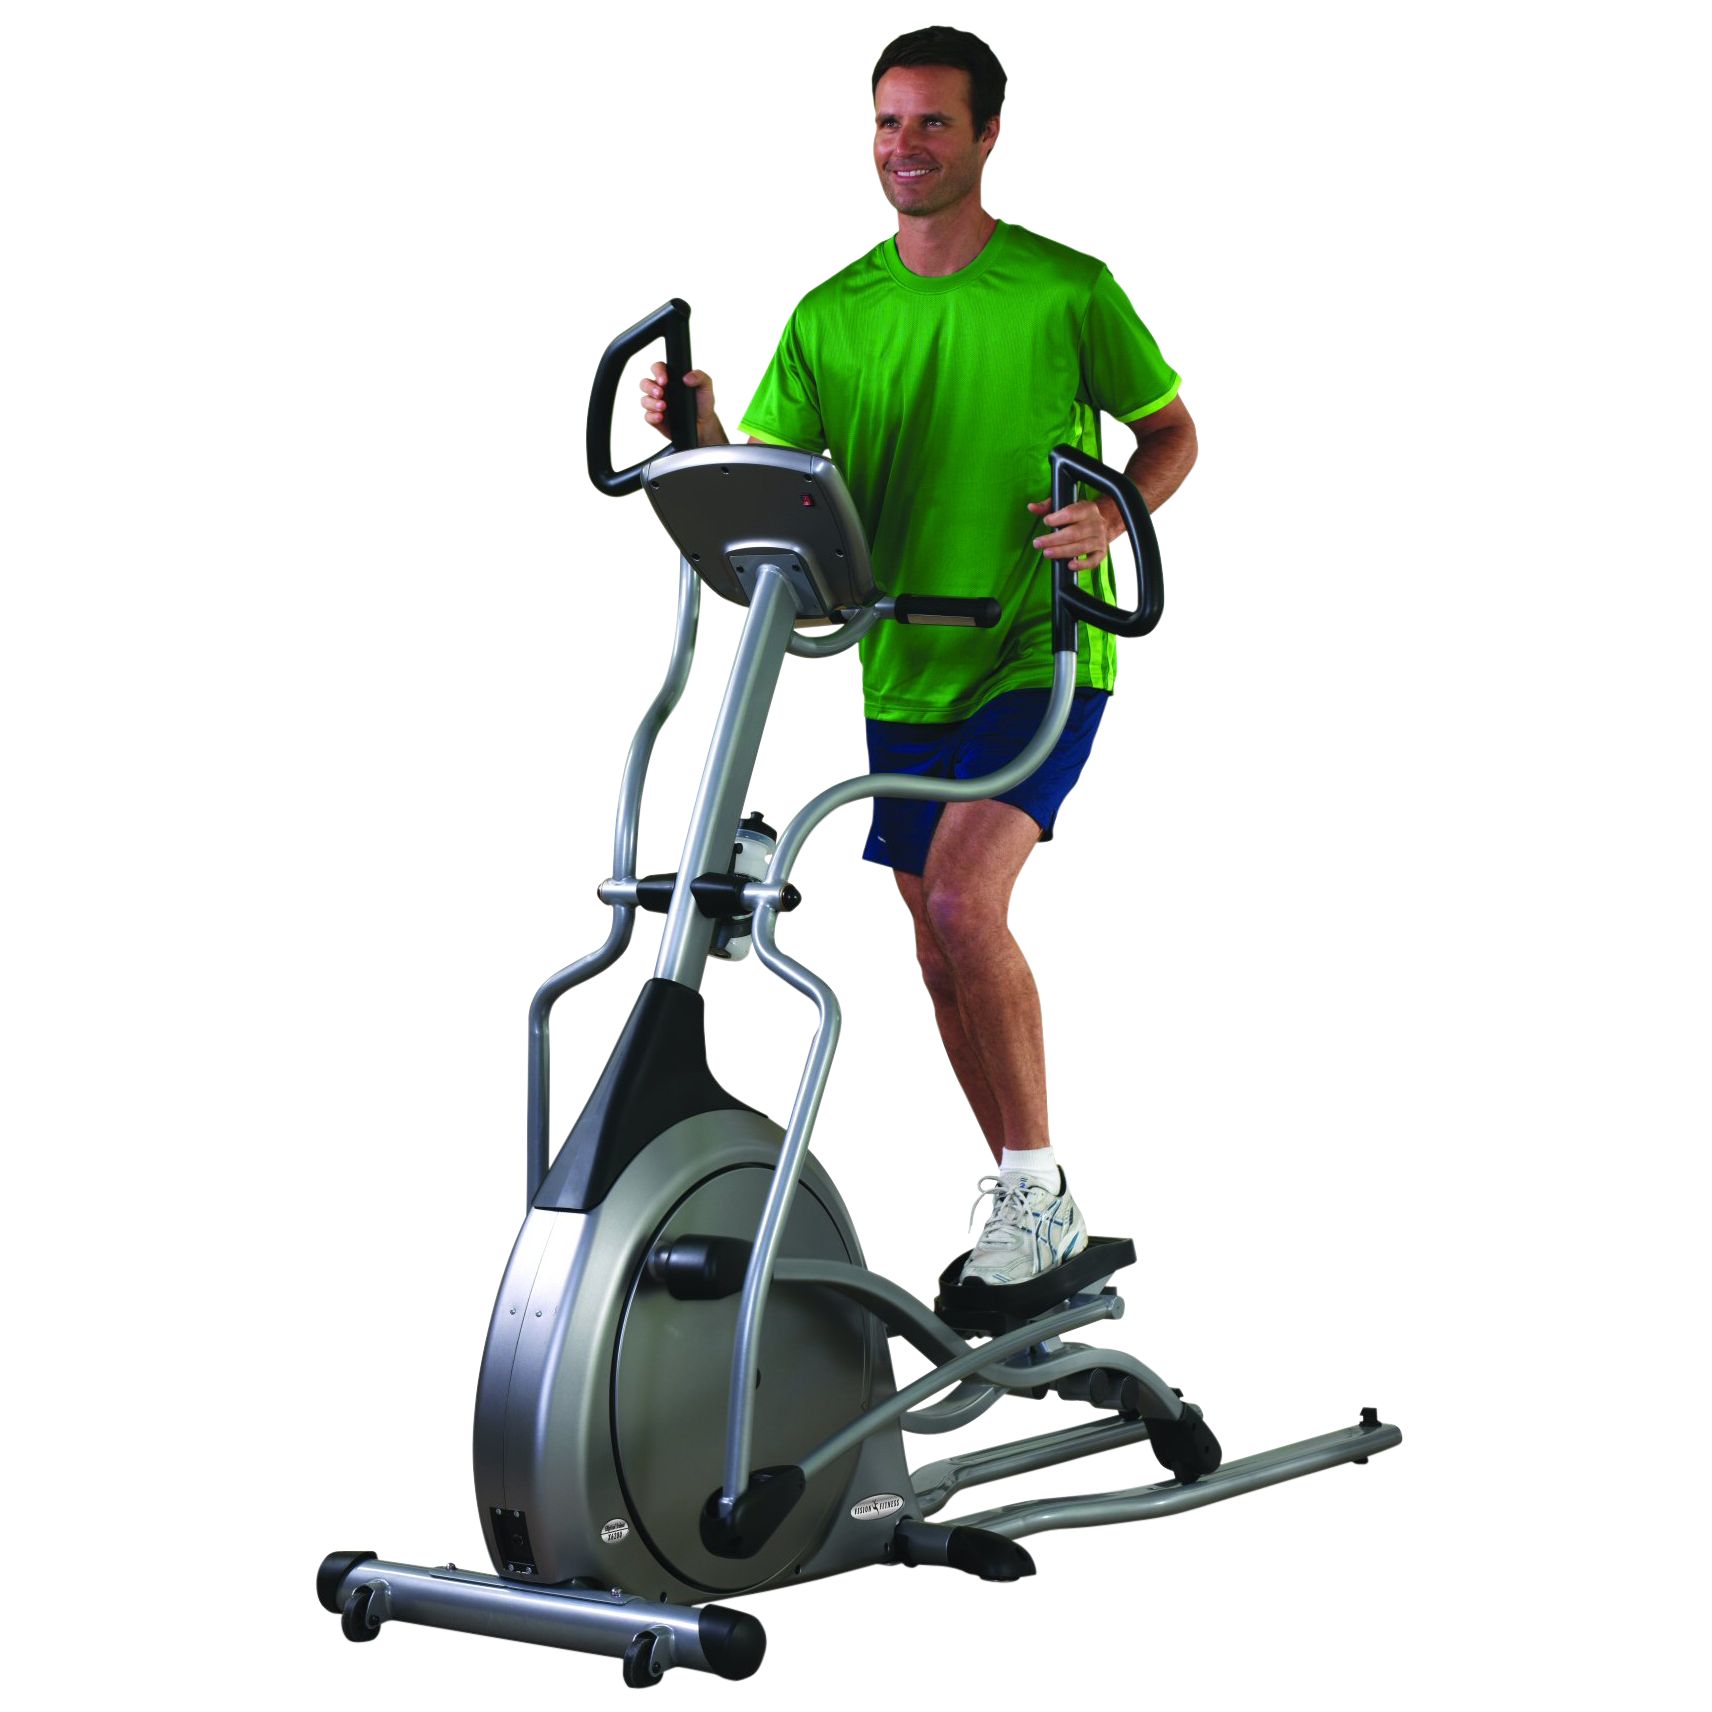 Vision Fitness X6200 Folding Elliptical Trainer with Deluxe Console at John Lewis